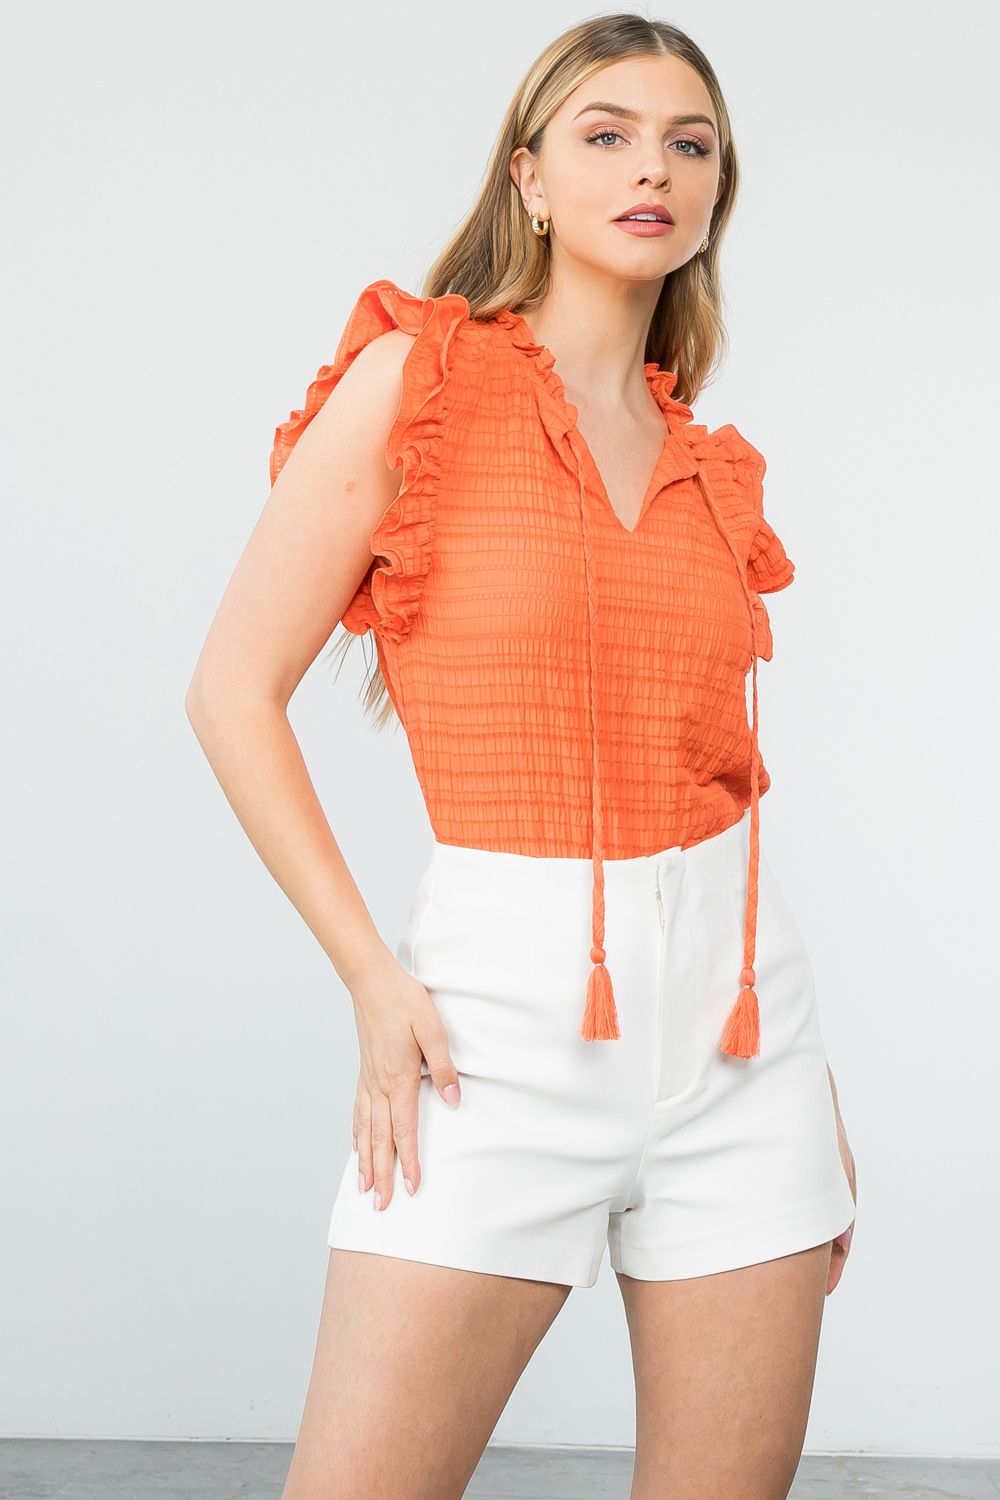 Sun and Sand Top. Everyday kind of top! Smocked, ties in front with ruffle sleeves. Adorable orange top